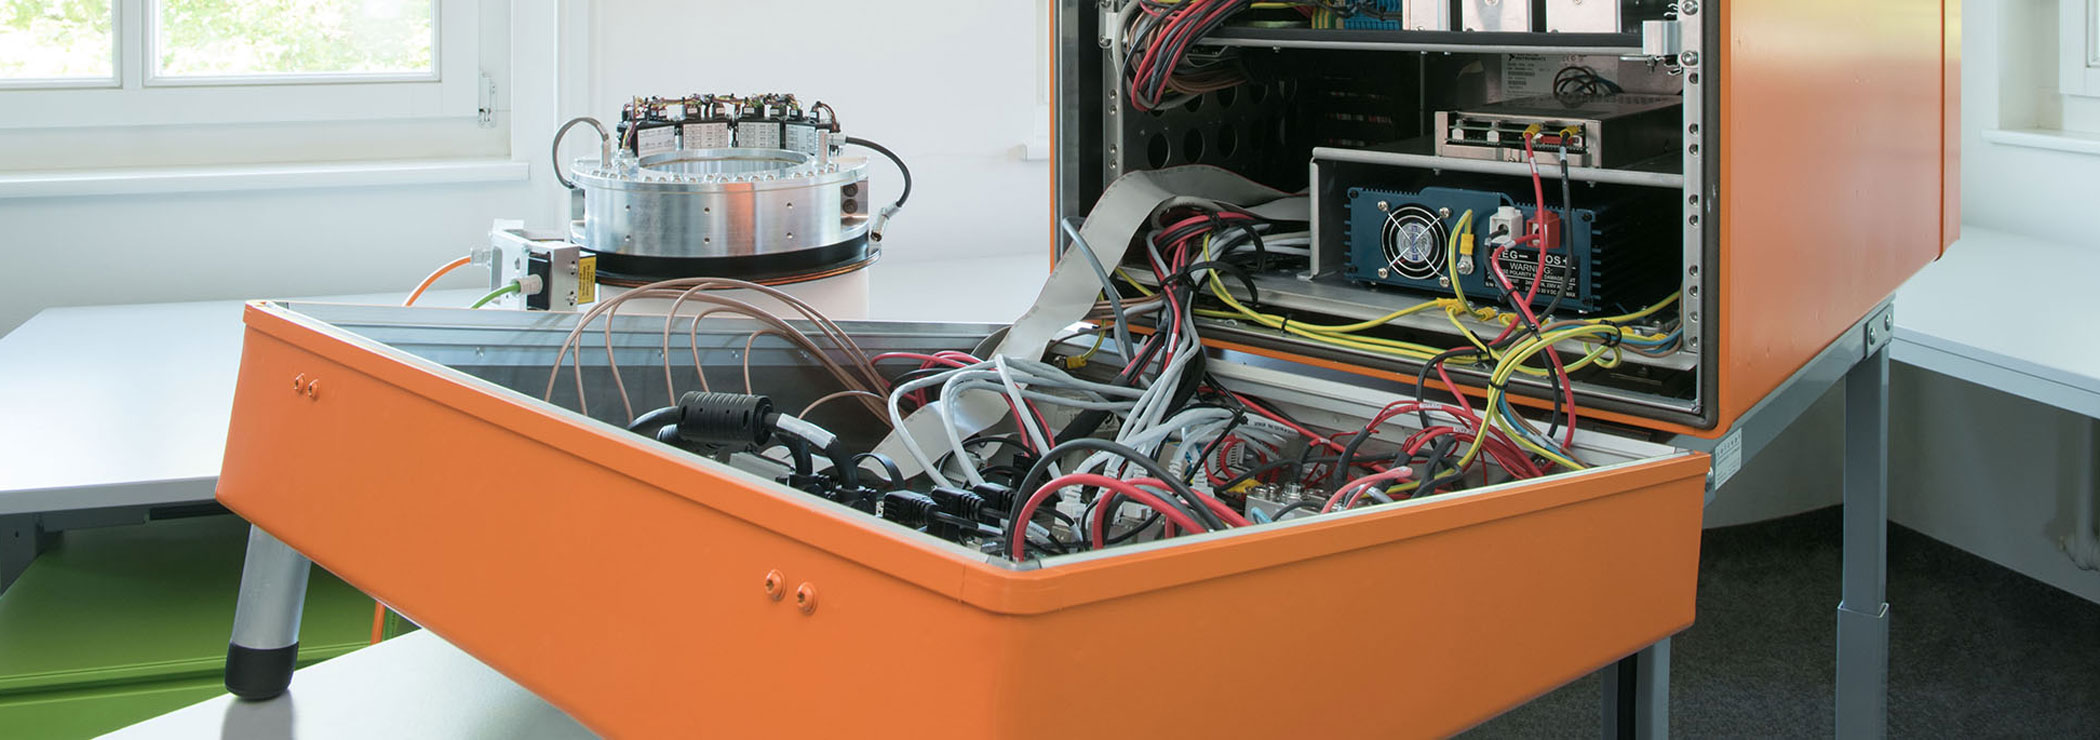 Flight test instrumentation: orange electronics box with measurement and recording devices for flight tests